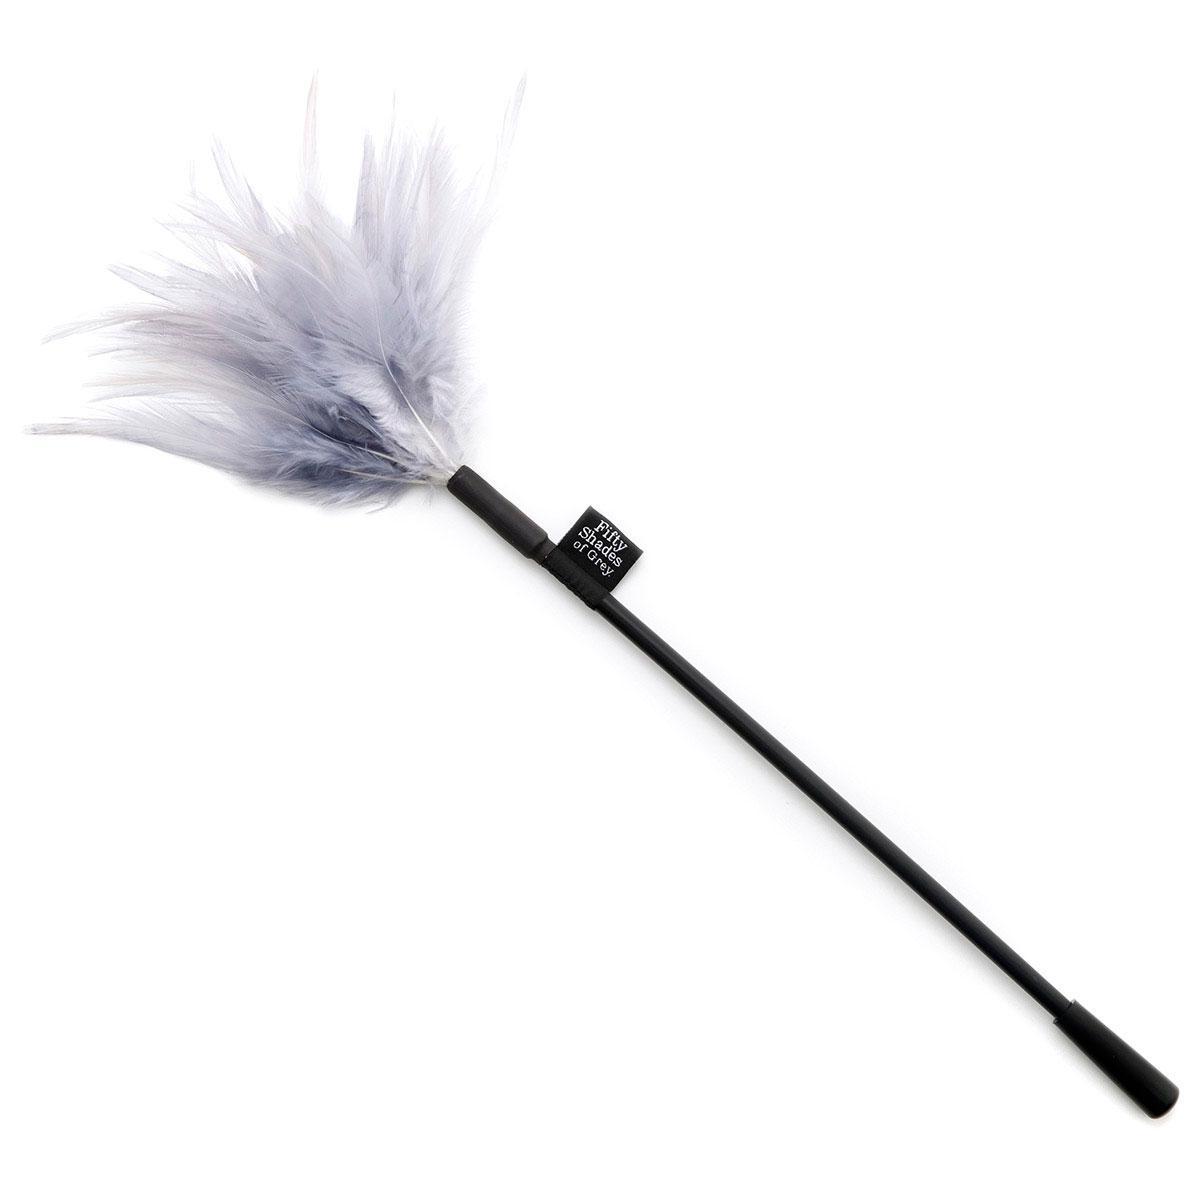 Fifty Shades Tease Feather Tickler - Buy At Luxury Toy X - Free 3-Day Shipping